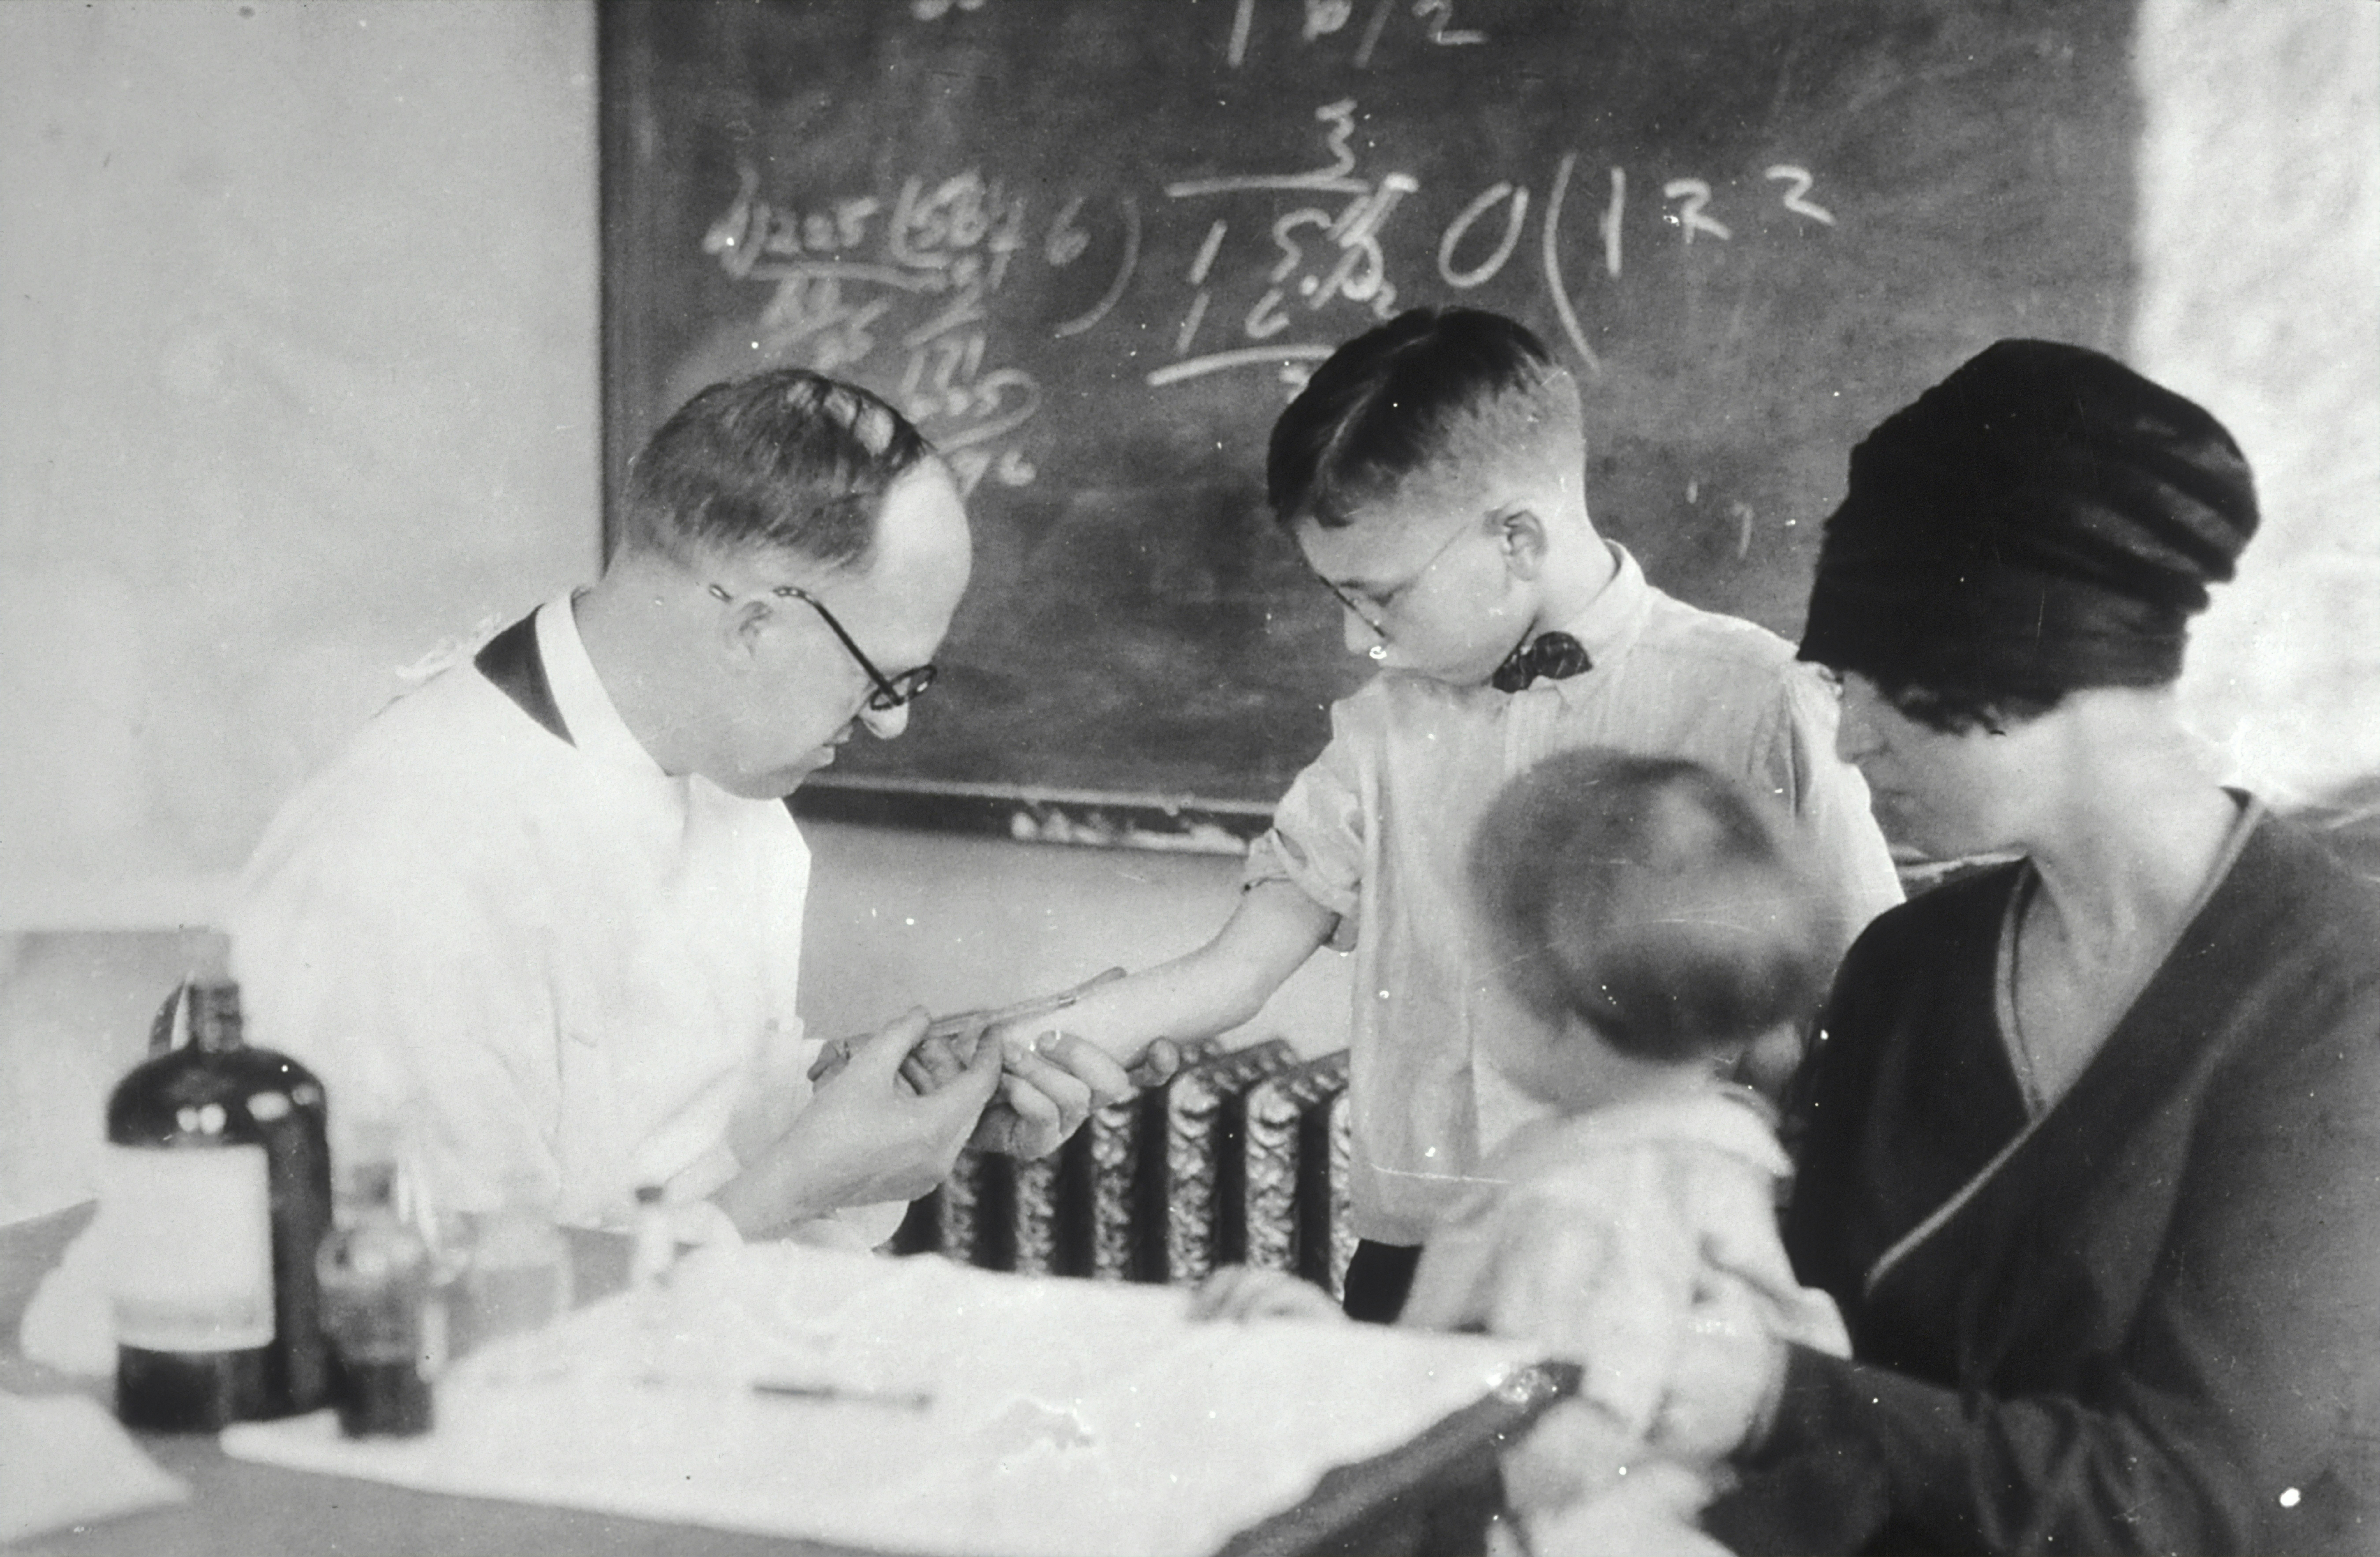 Schick Test 1915. Photo of young boy receiving the Schick Test from a doctor. Boy is accompanied by mother and younger sibling (1915). The Schick Test is a measure of immunity to diphtheria.